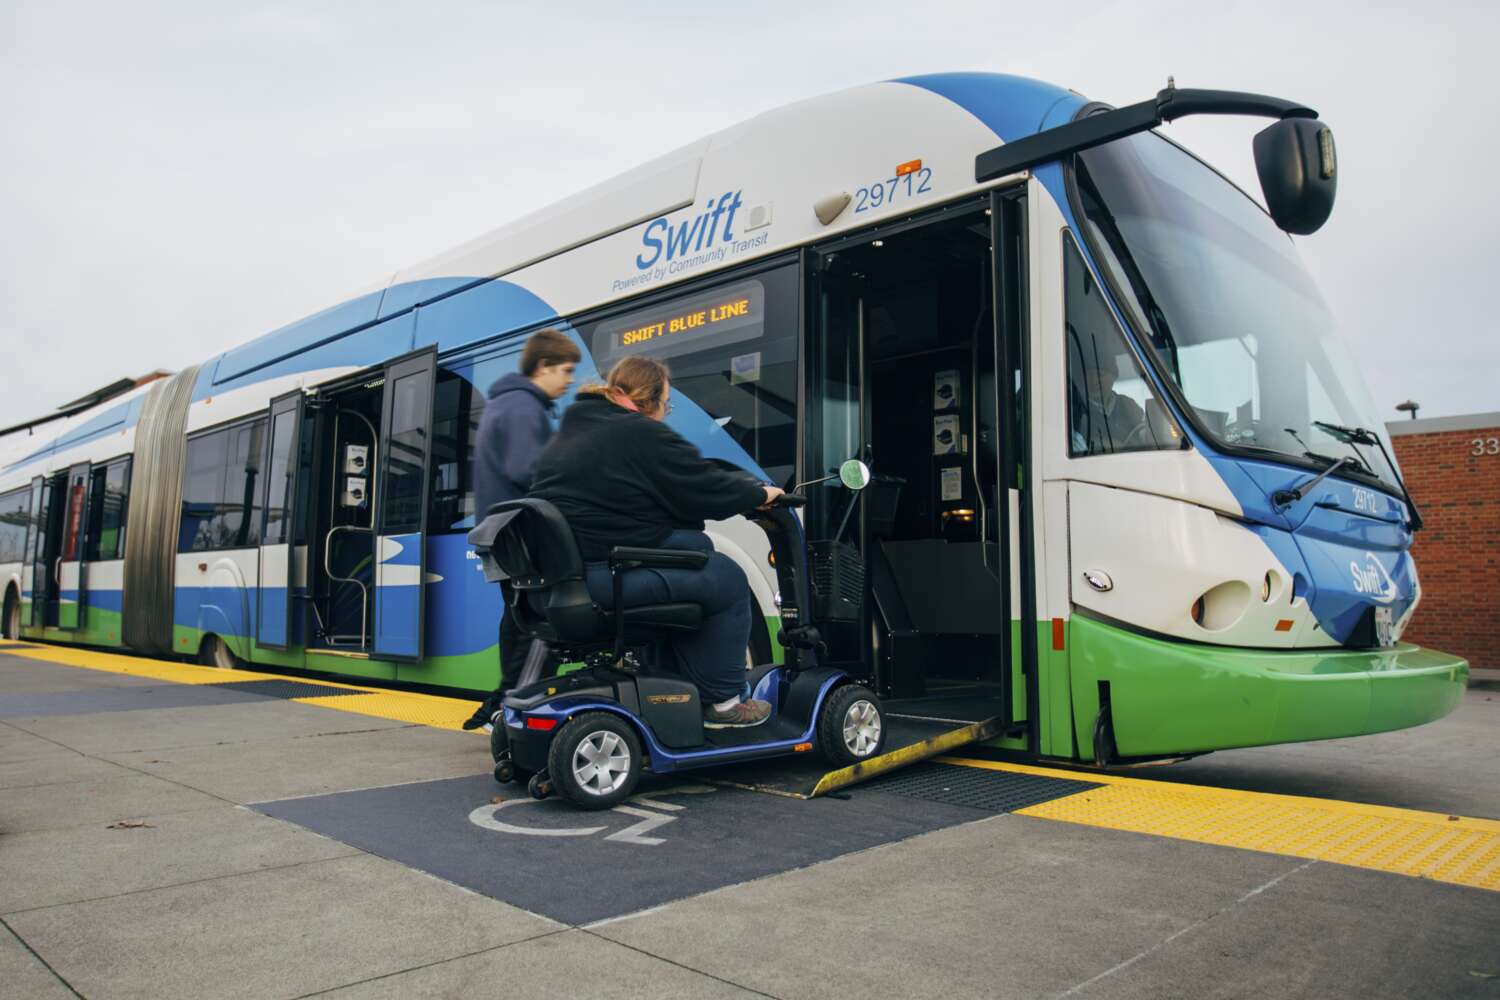 Riders with disabilities qualify for reudced ORCA rates